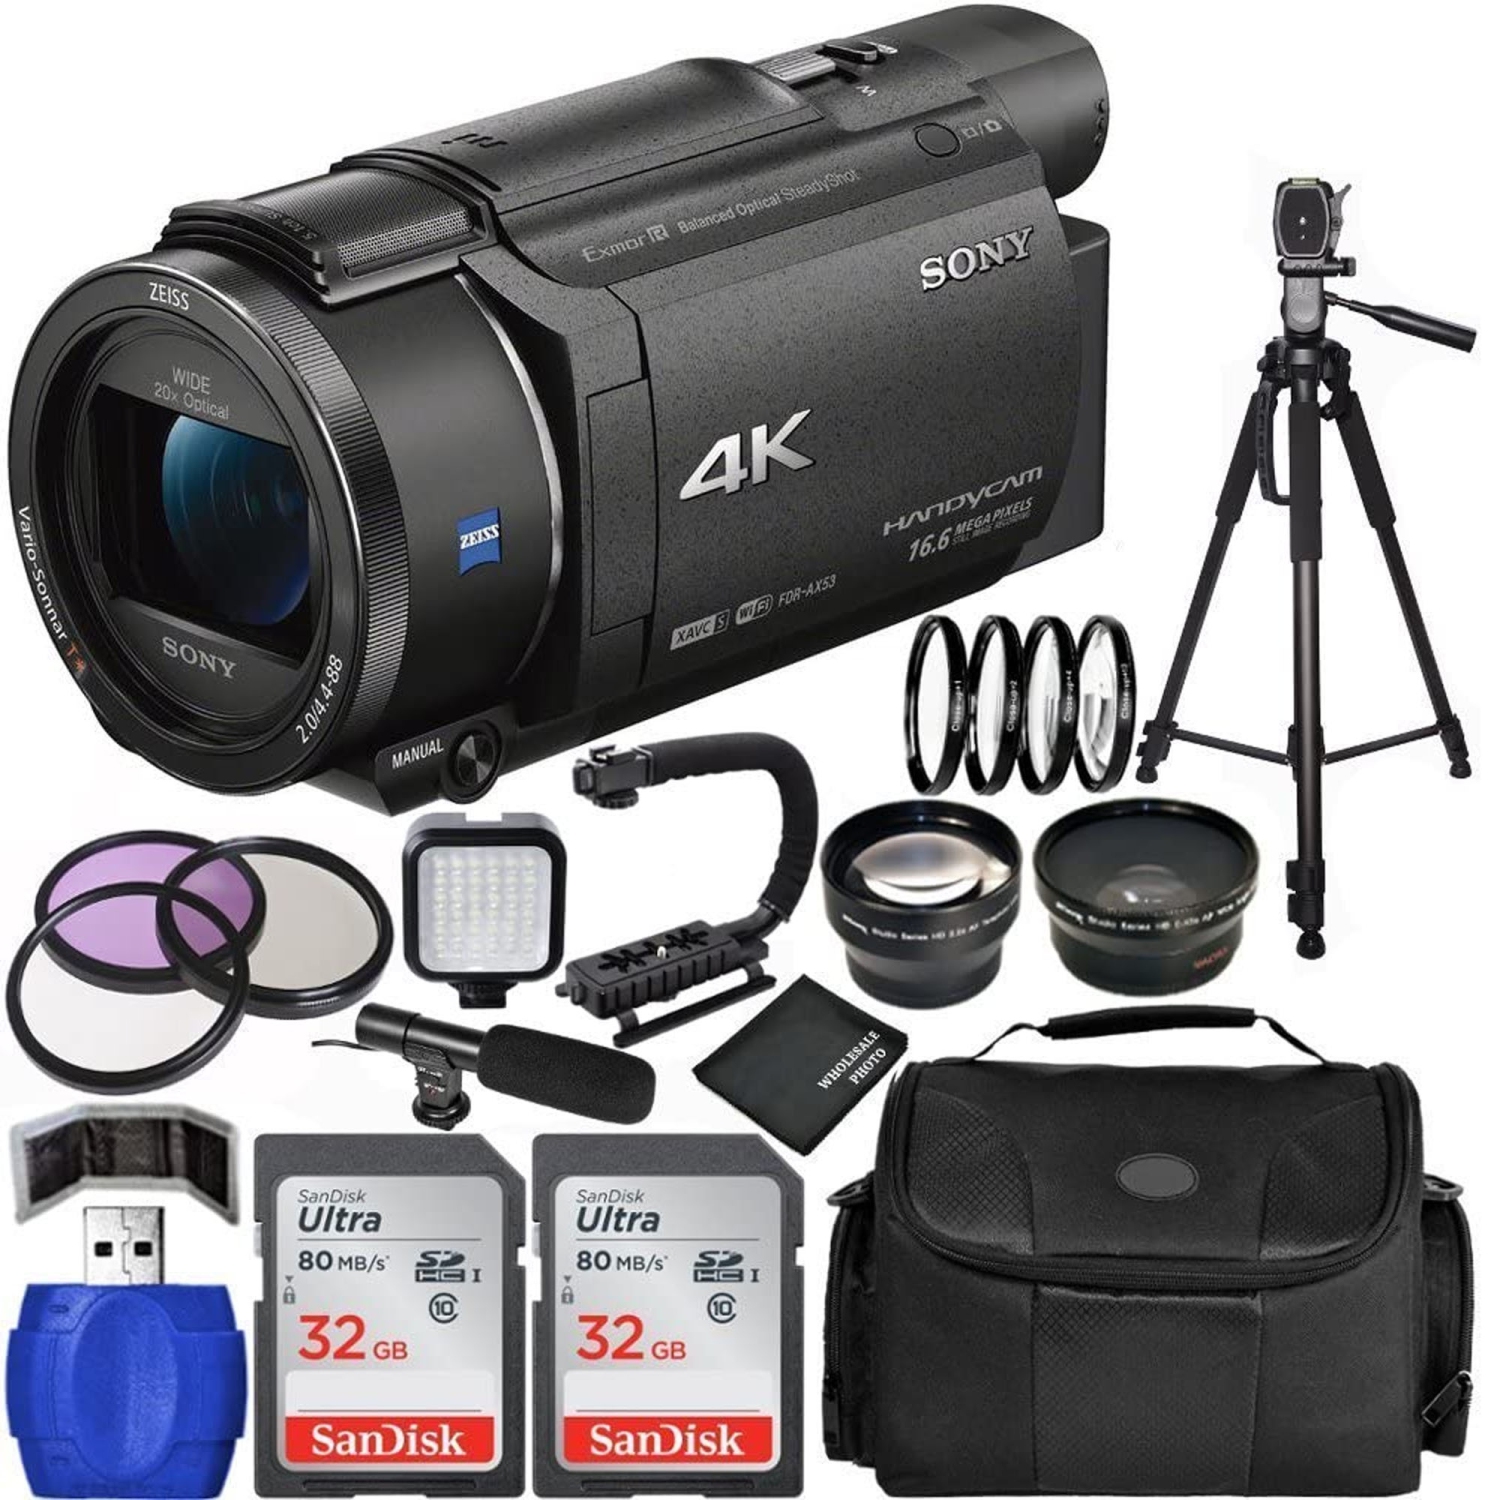 Sony FDR-AX53 4K Ultra HD Handycam Camcorder Bundle with Carrying Case and Accessory Kit - US Version w/ Seller Warranty